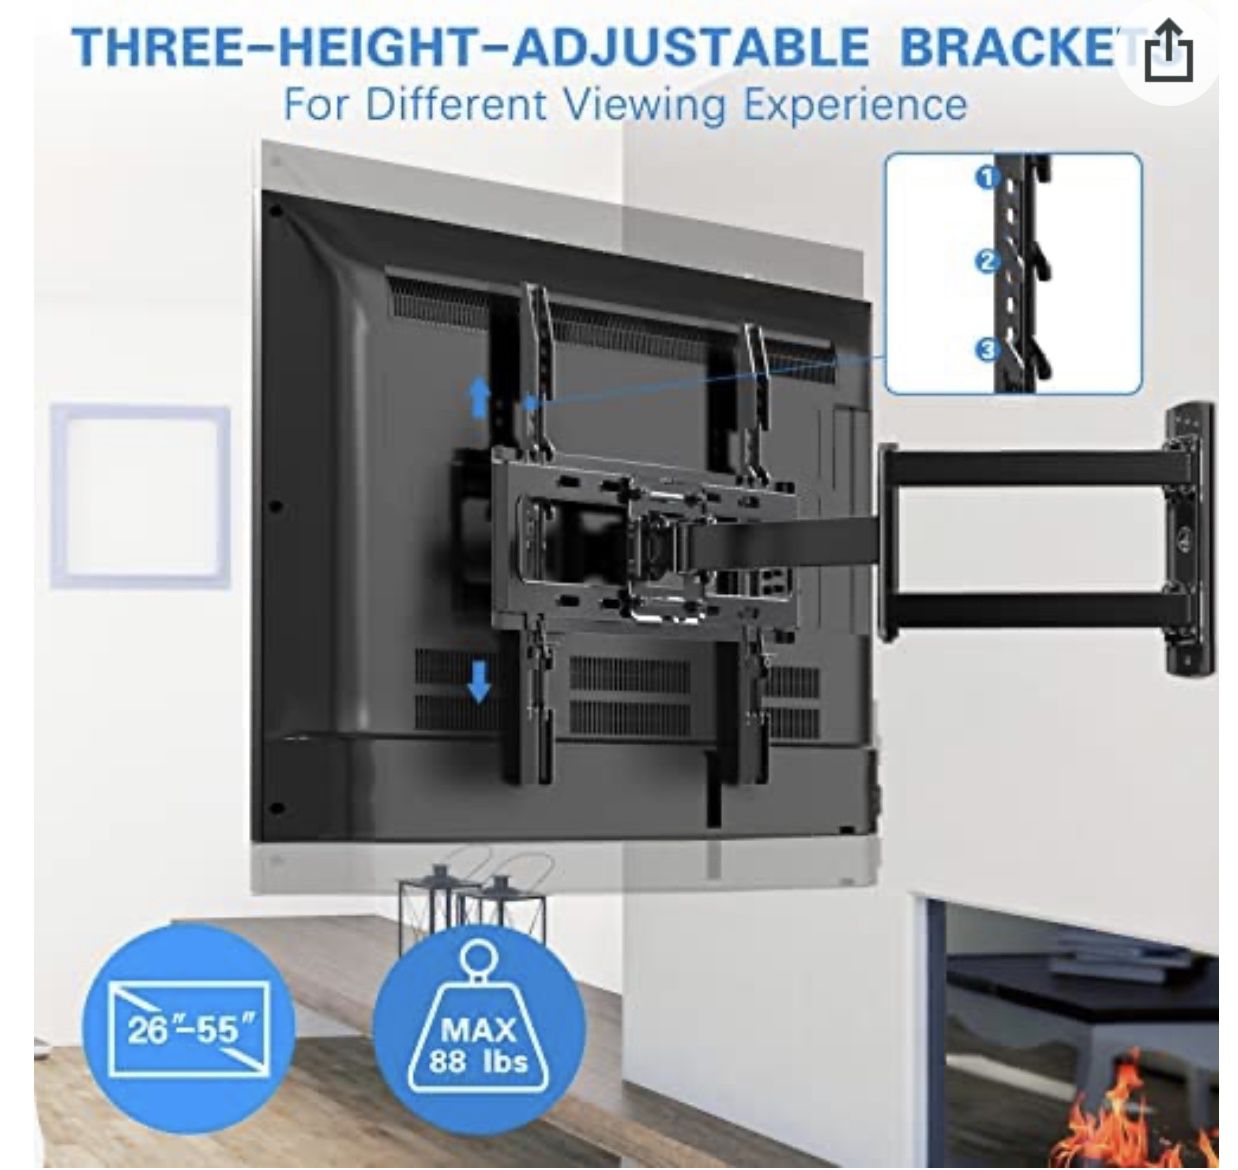  Full Motion TV Wall Mount for Most 23-55 inch LED LCD OLED Flat & Curved TVs up to 88lbs, Single Articulating Arm, Adjust Bracket Height, Swivel, Til